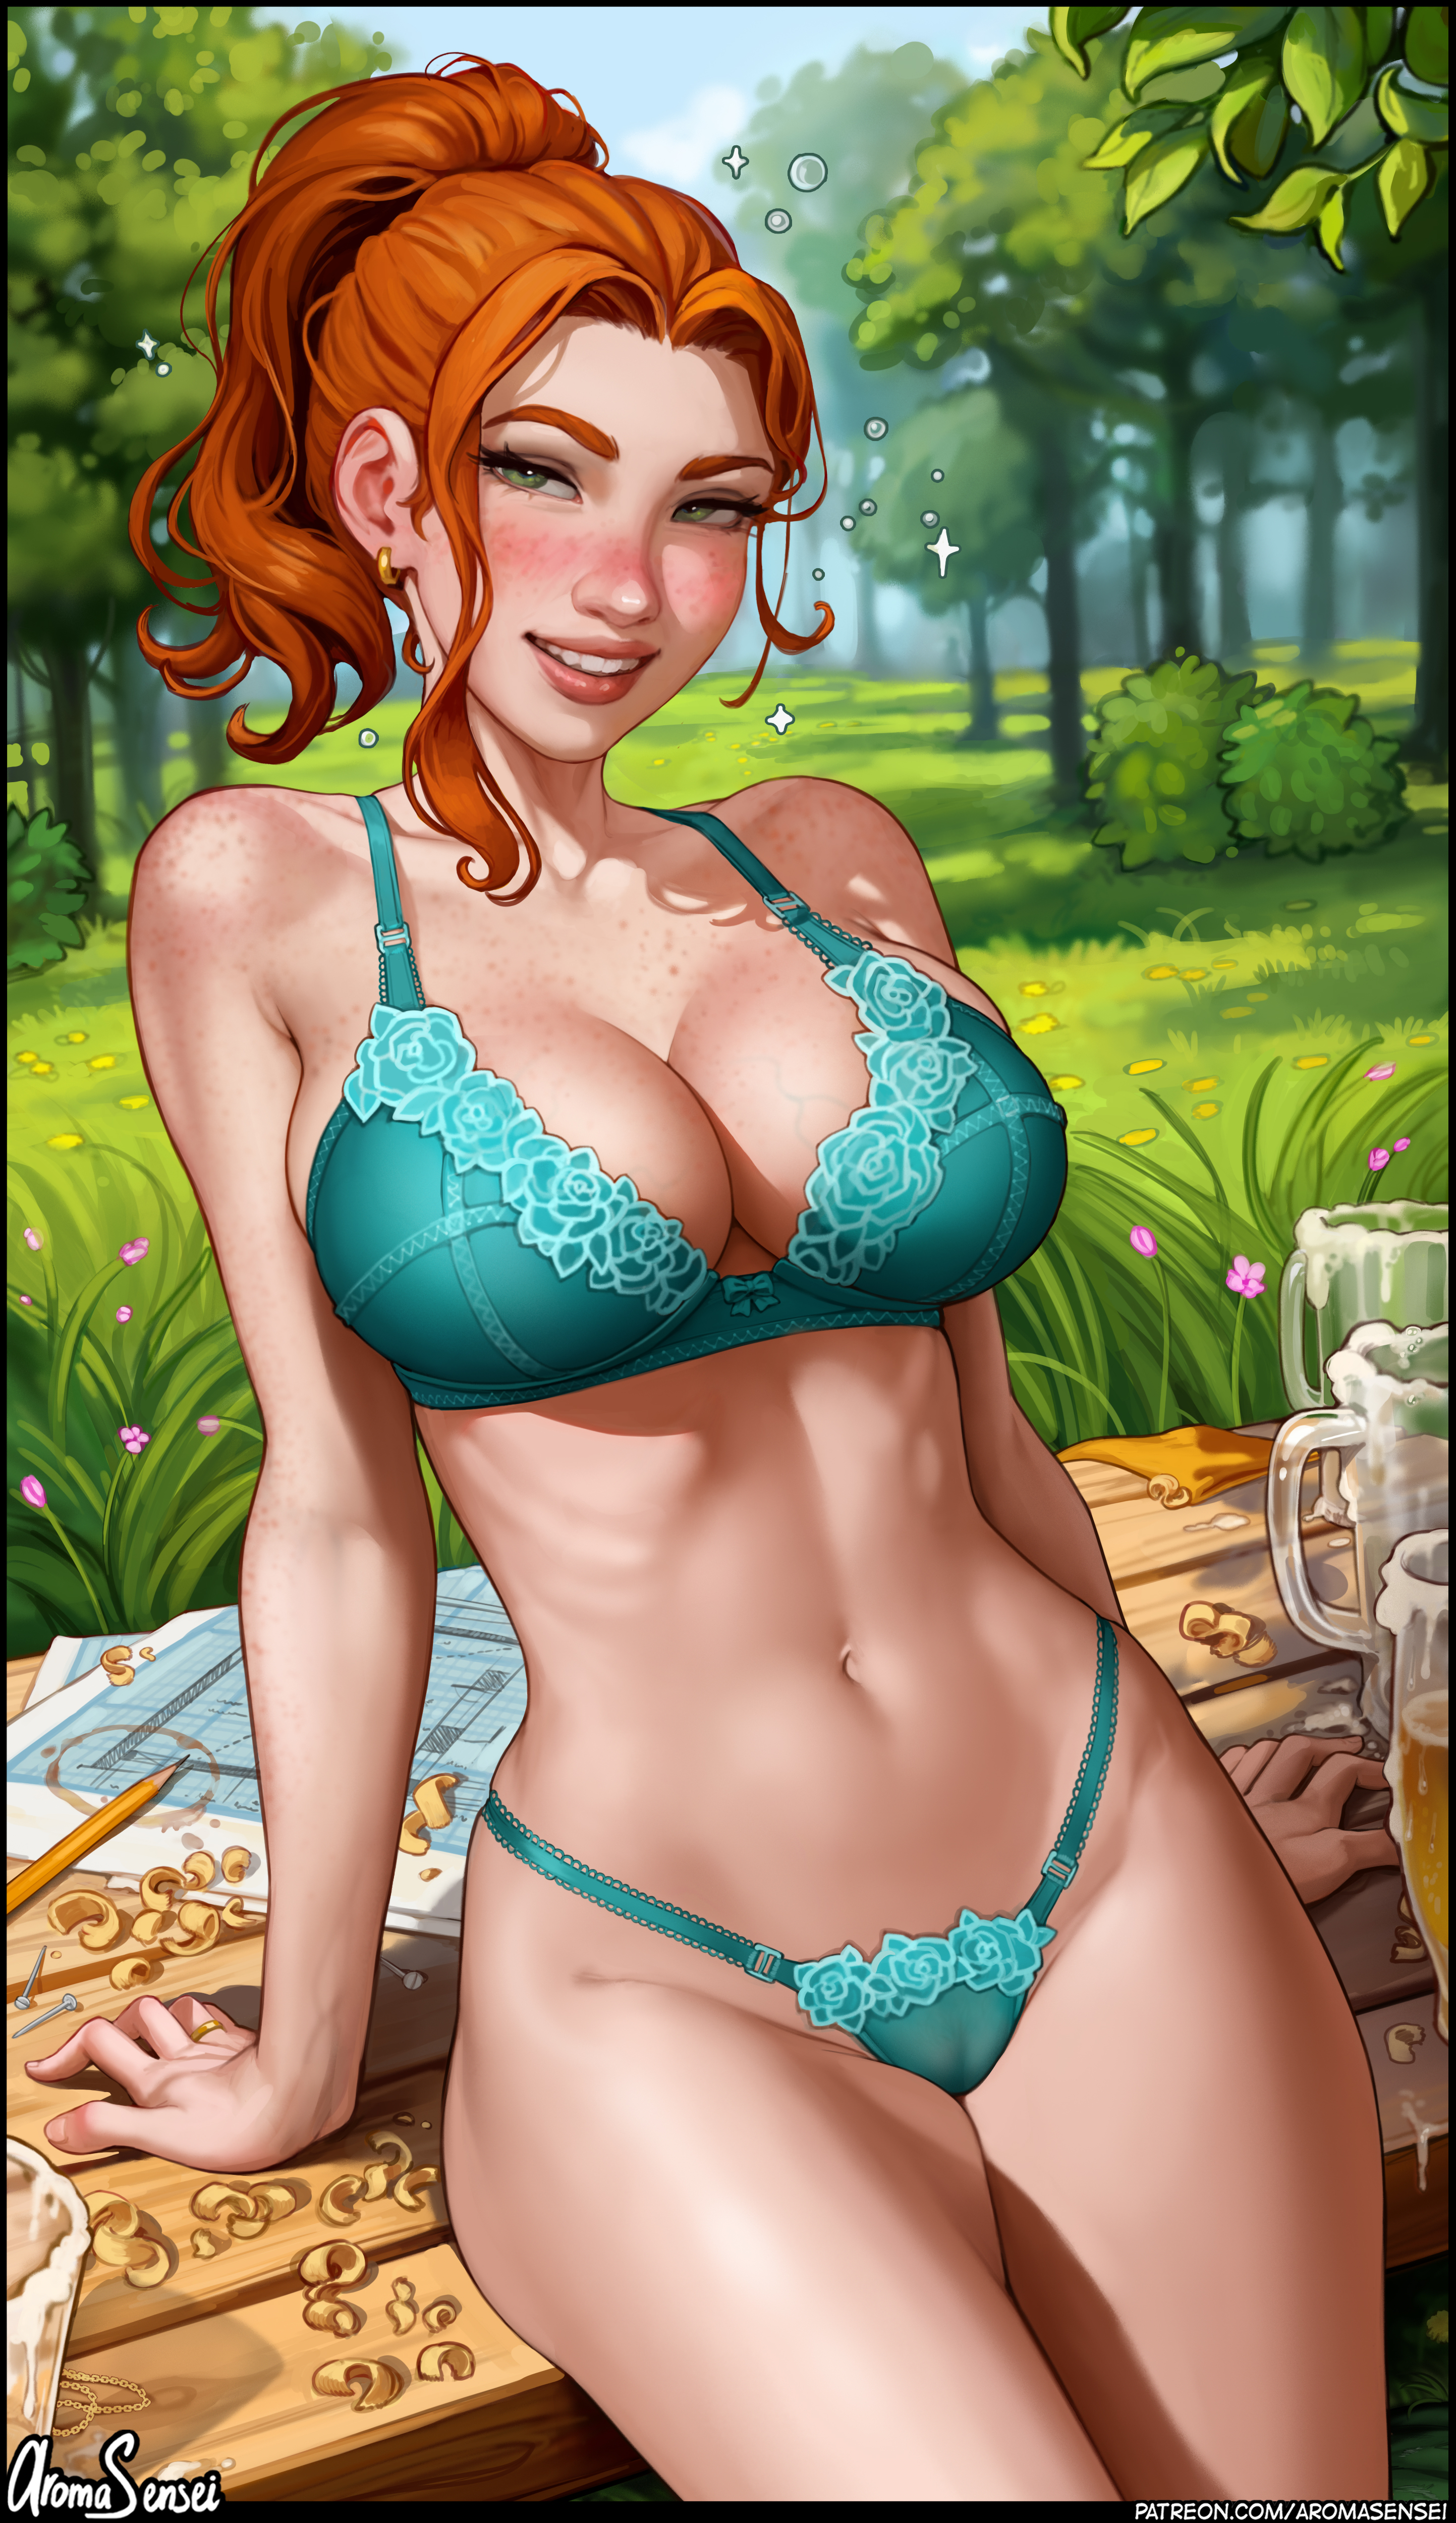 General 2886x5000 Robin (Stardew Valley) Stardew Valley video games video game girls video game characters redhead artwork drawing fan art Aroma Sensei lingerie smiling portrait display grass trees